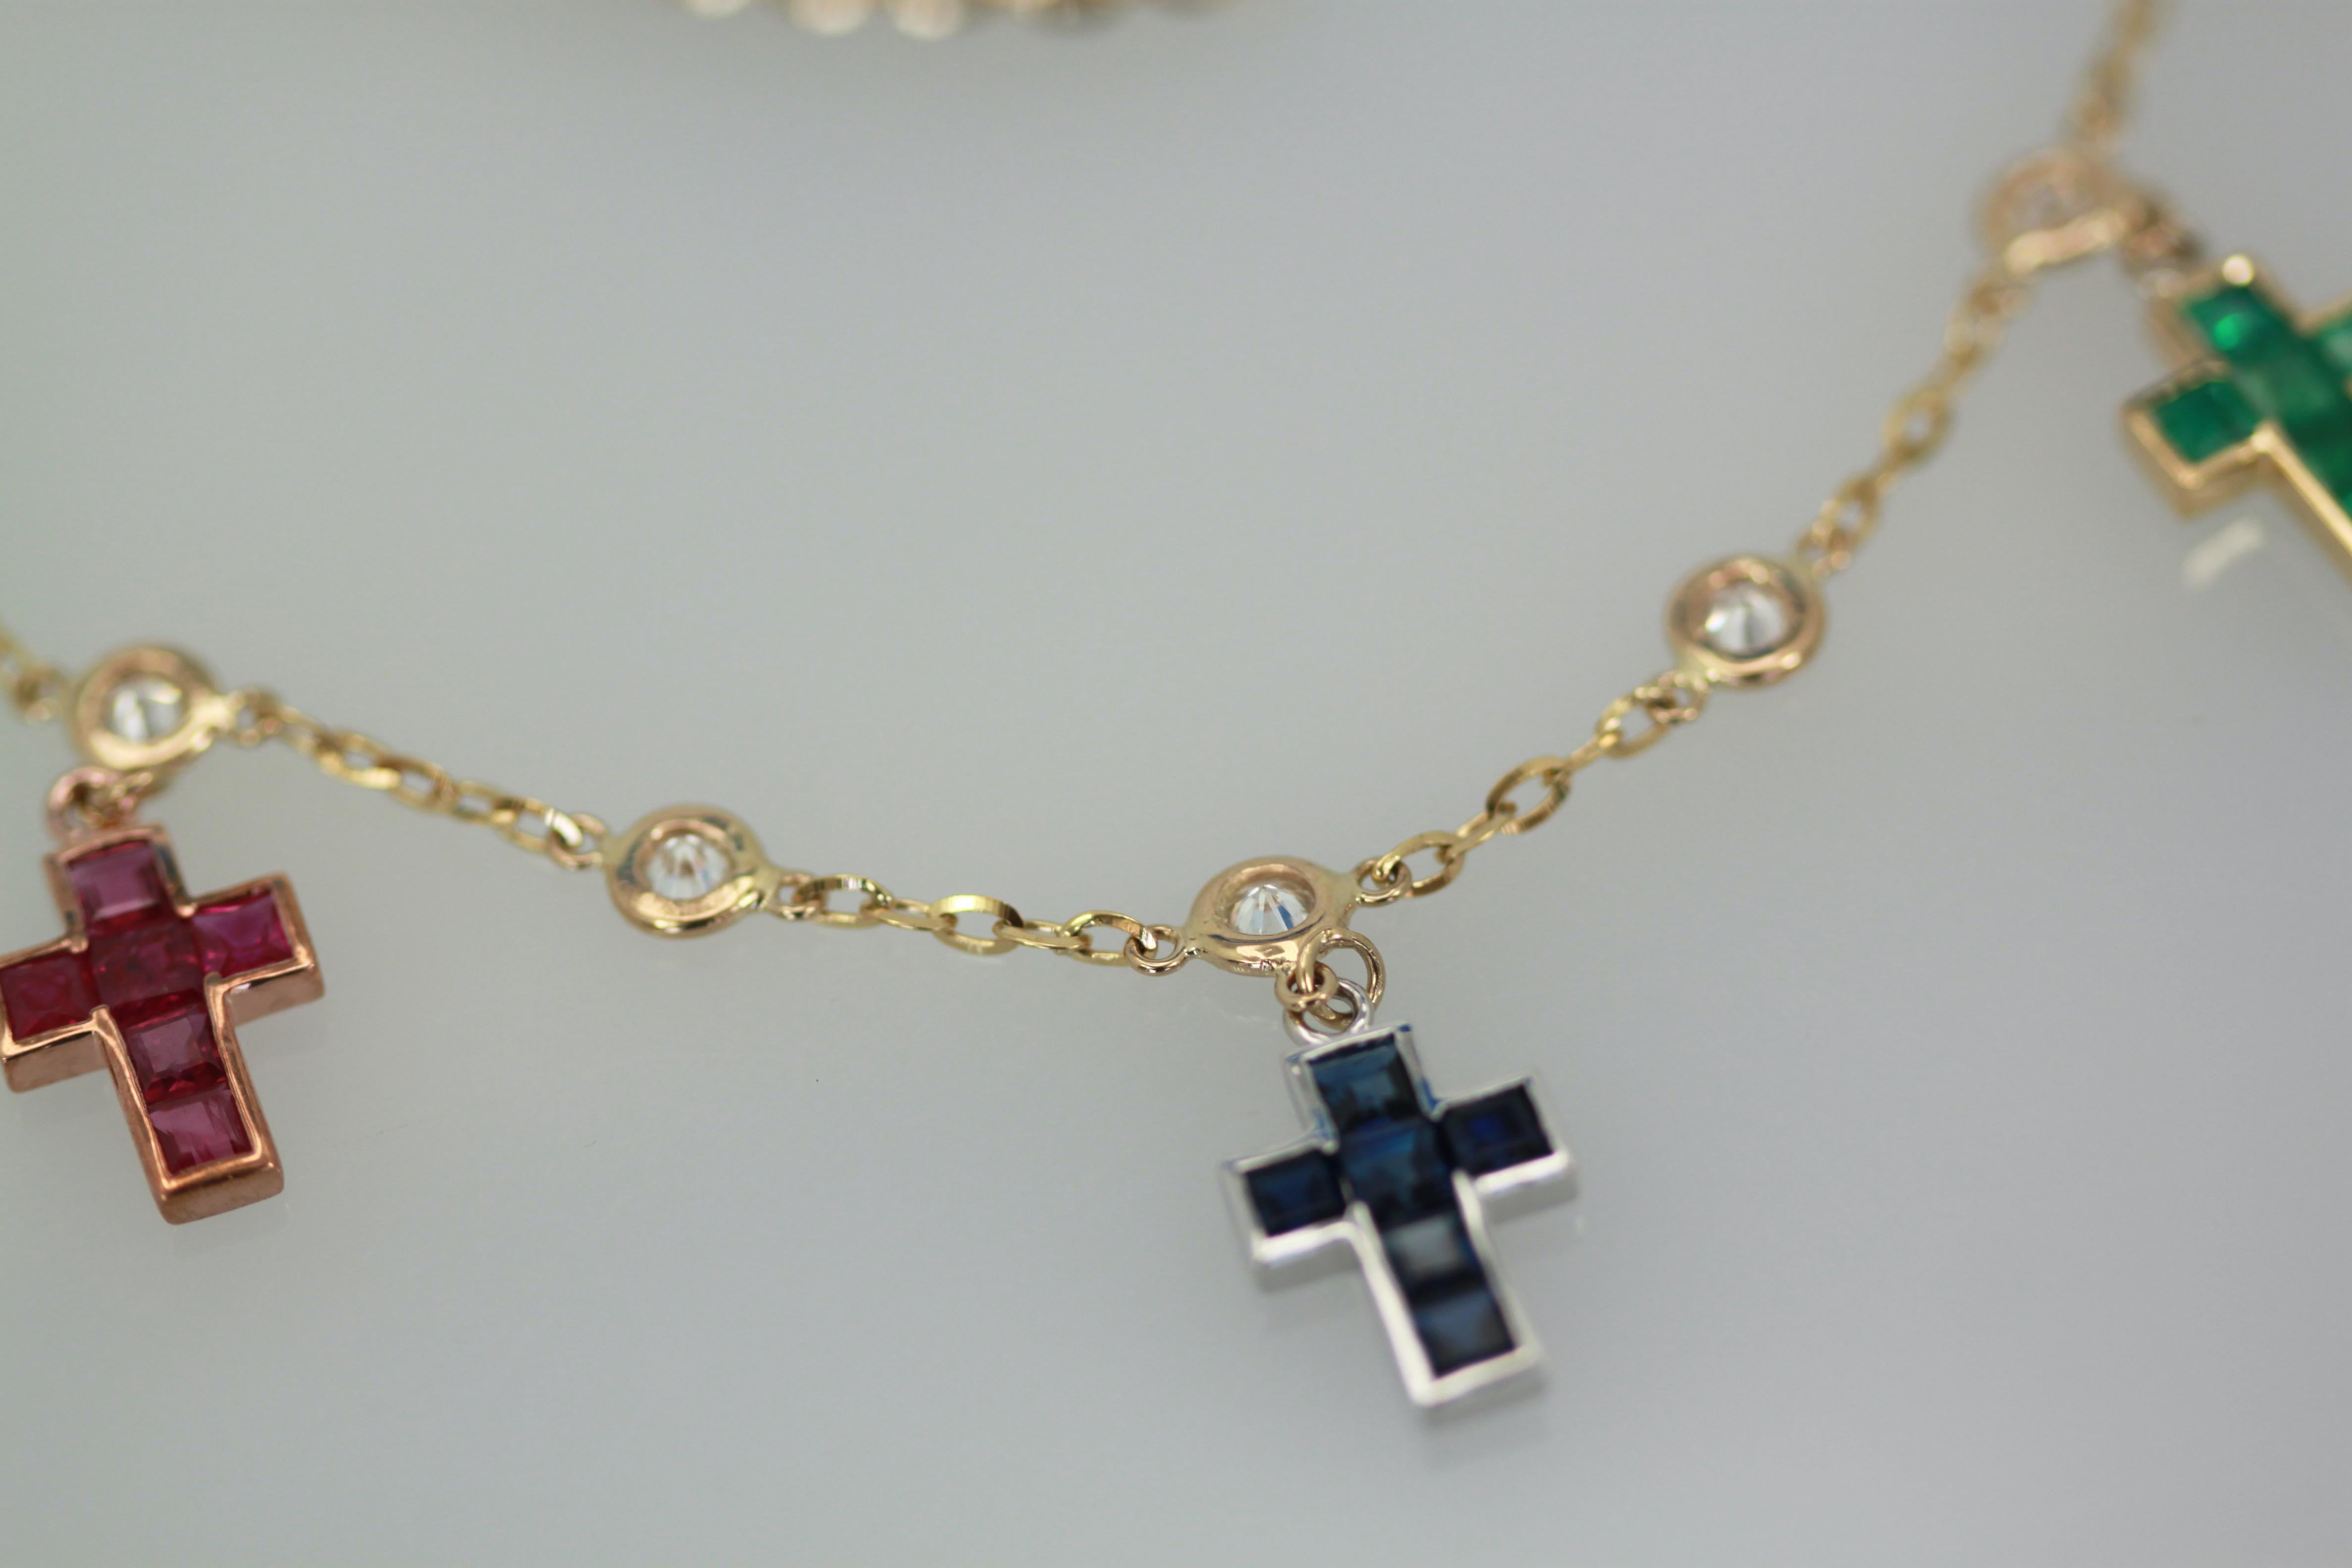 This lovely necklace is set with Diamonds and crosses.  There is one Ruby, one Sapphire, one Emerald Cross all in baguette stones with round Diamonds on top and between.  These are set on an 18K Yellow gold chain of 20